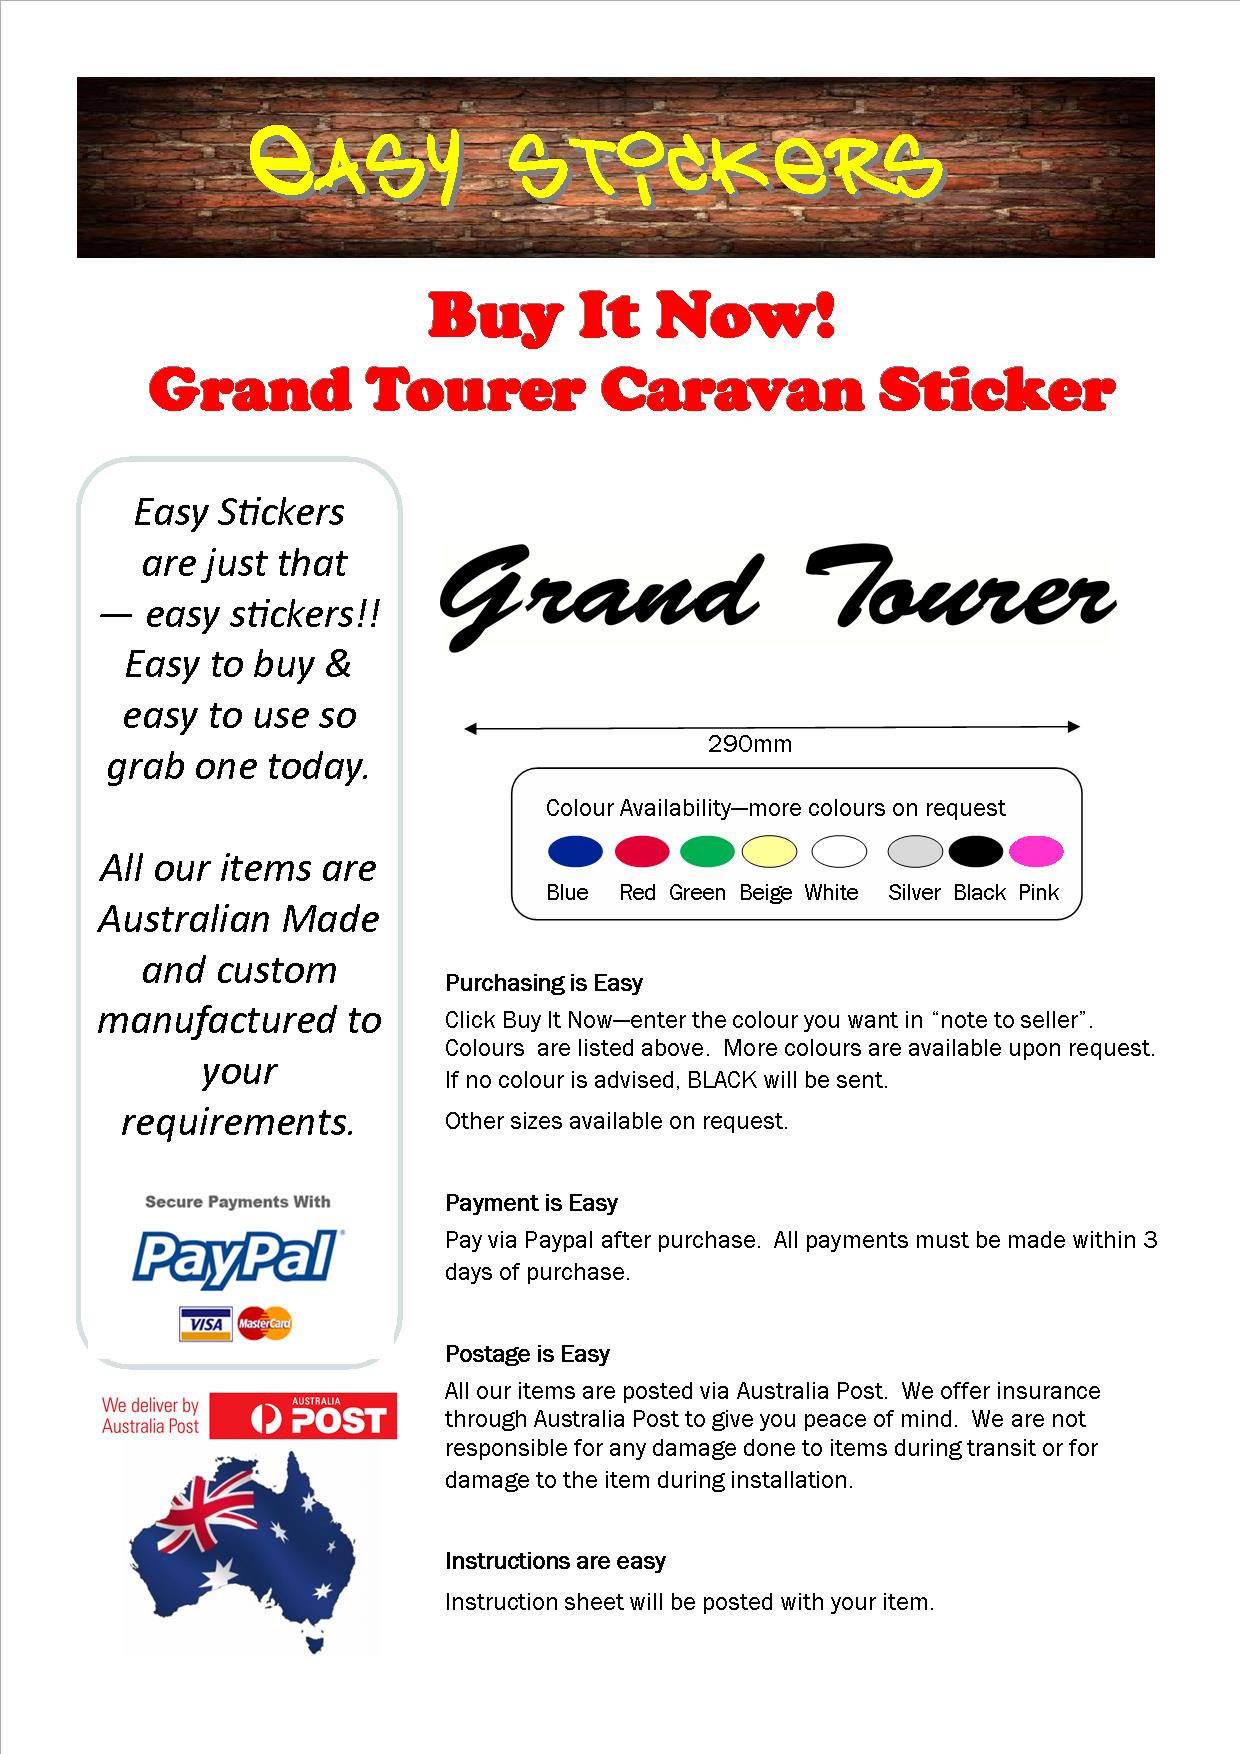 Ebay Template 290mm Grand Tourer.jpg  by easystickers